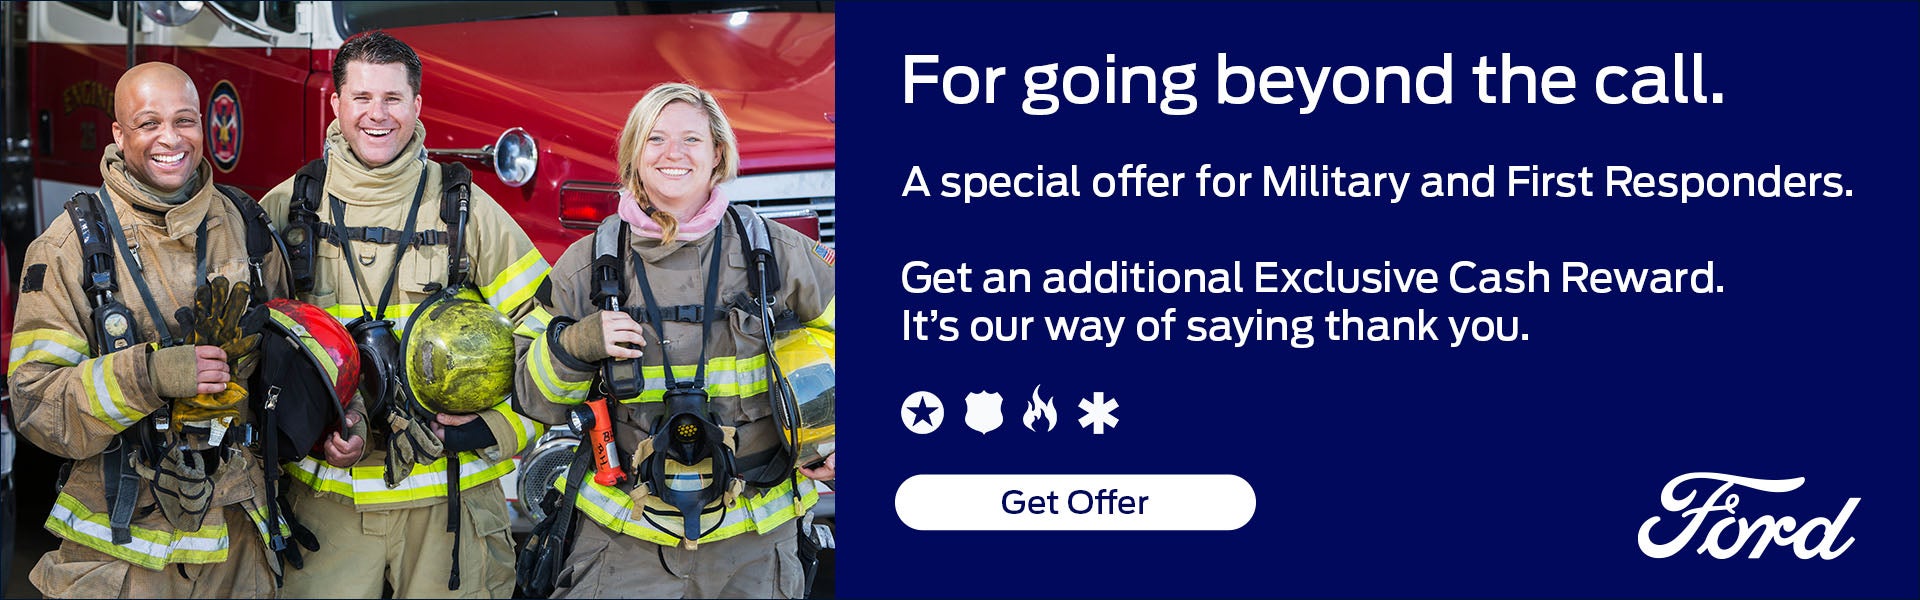 First Responders Offer at Thomasville Ford